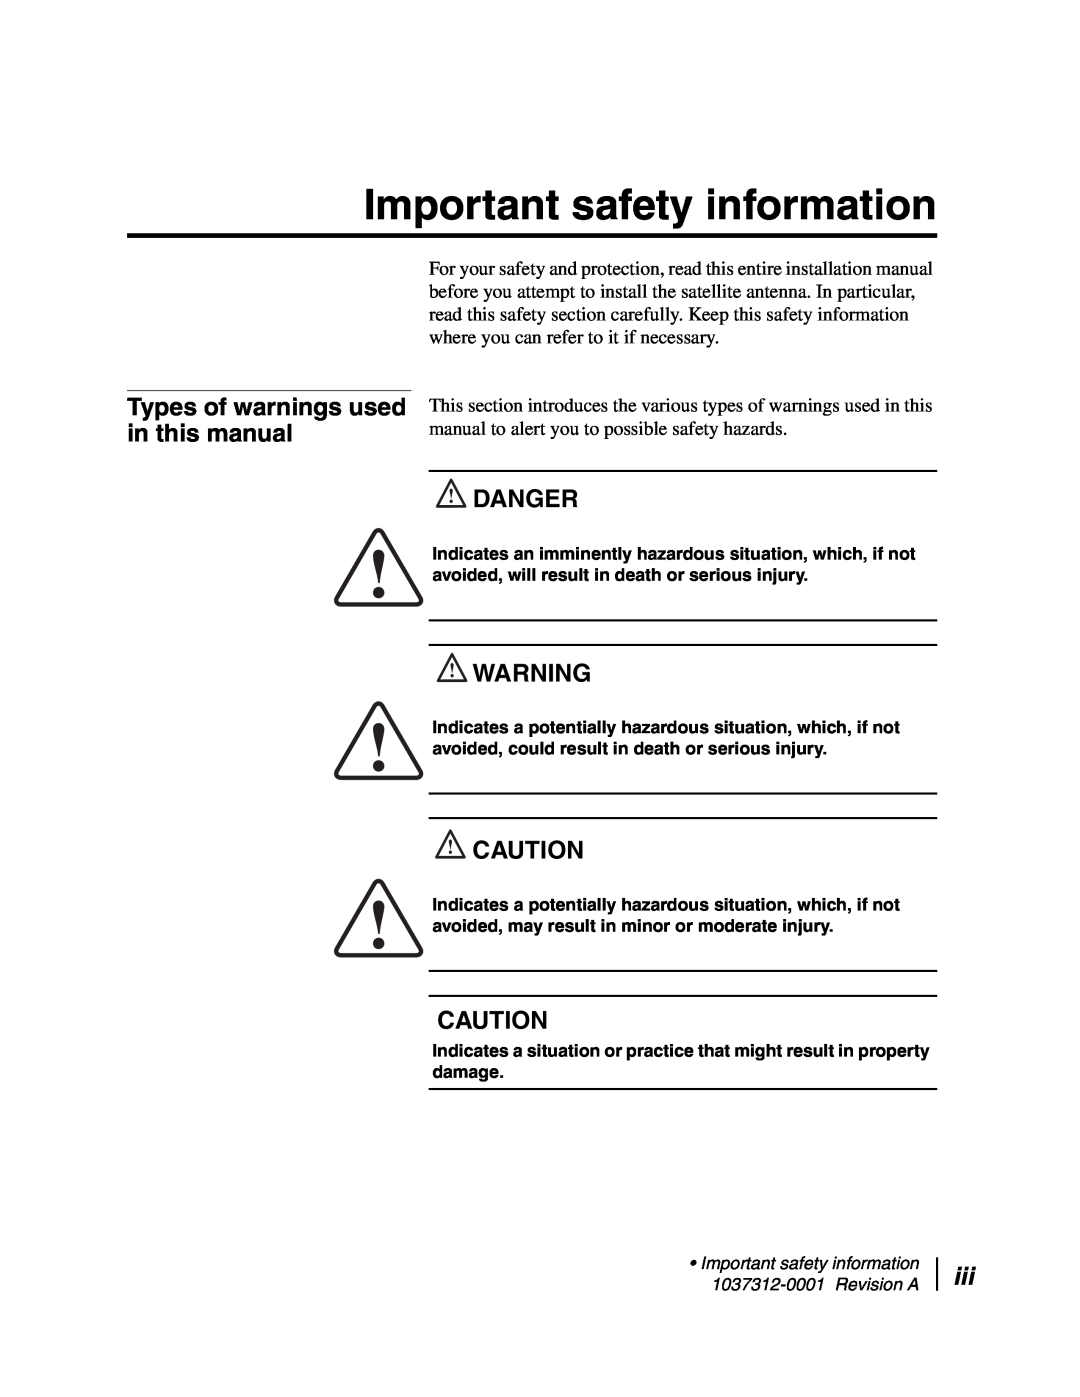 Hughes AN6-098P installation manual Important safety information, Types of warnings used in this manual, Danger 